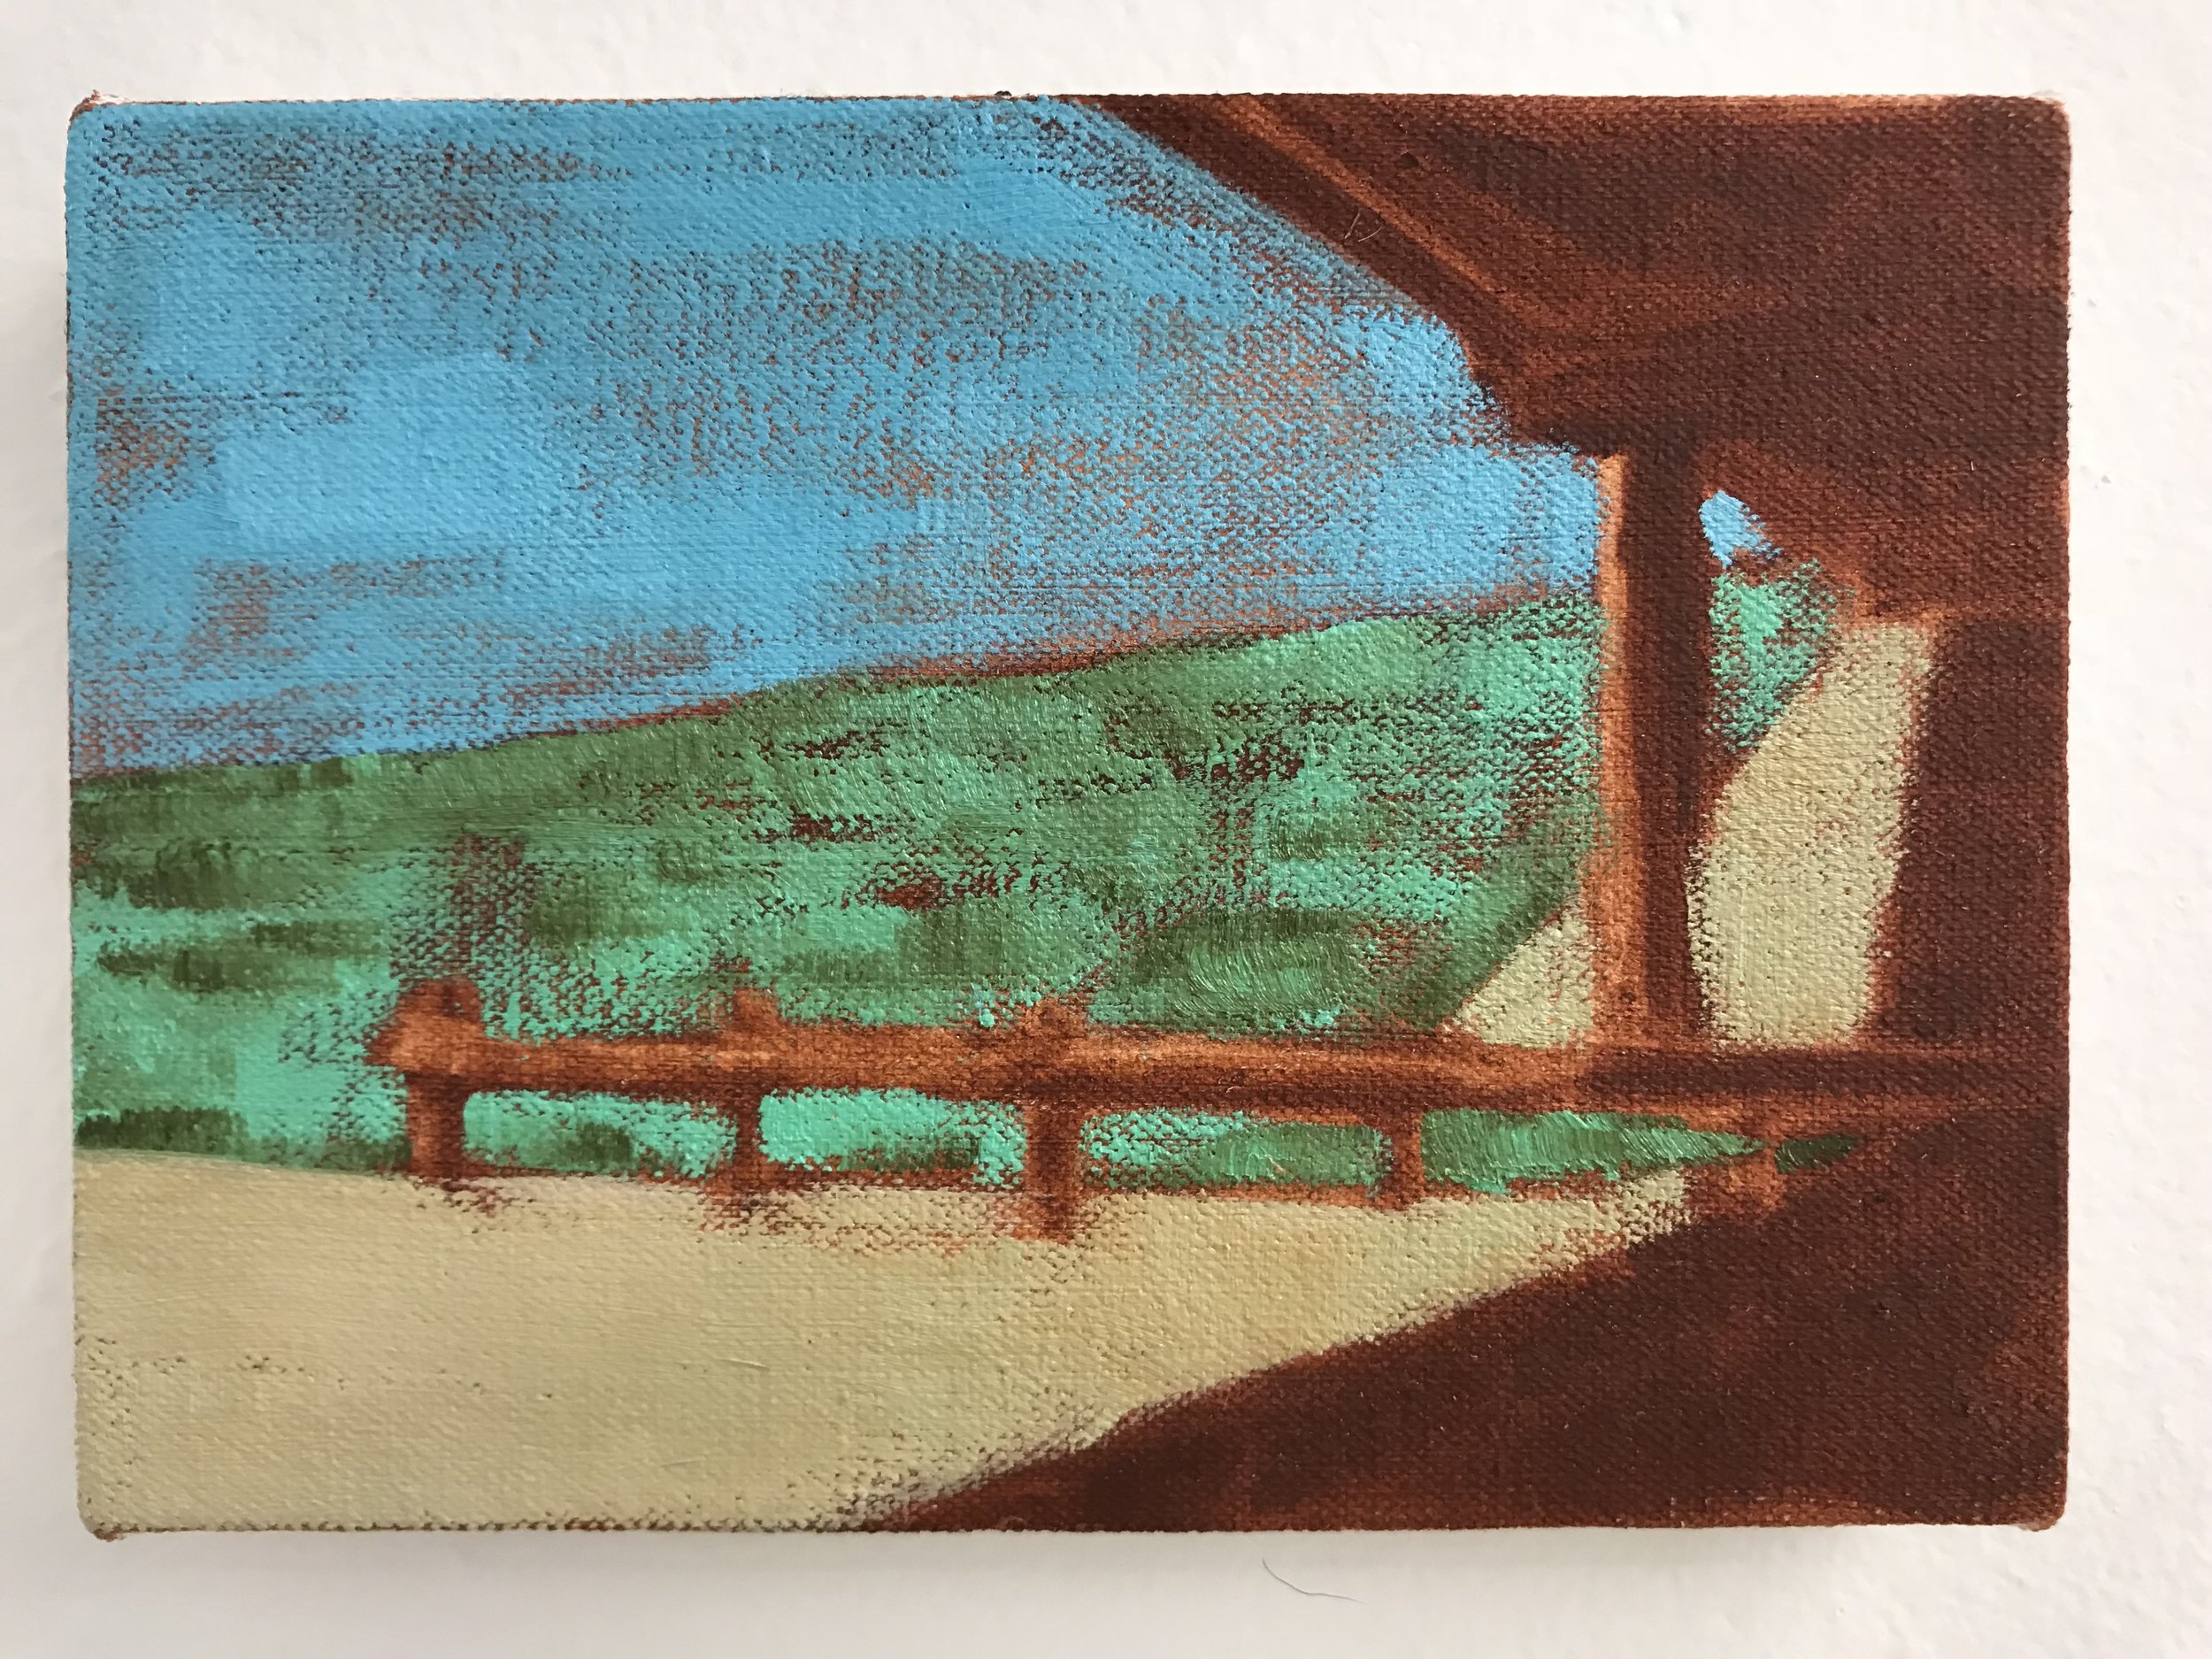 Still Hot in the Shade / 2018 / oil on canvas / 5" x 7"